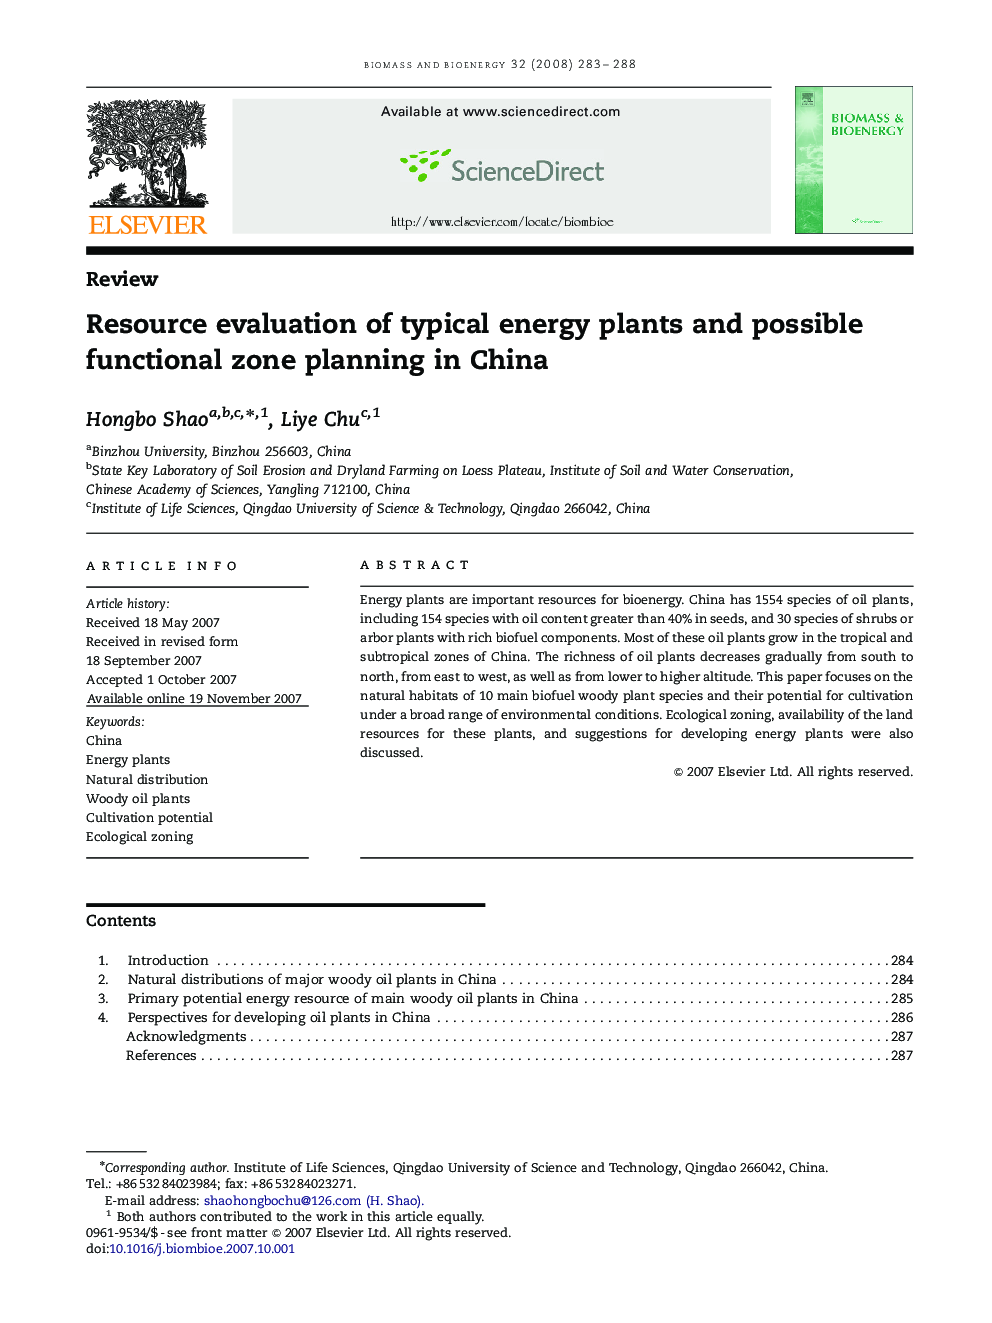 Resource evaluation of typical energy plants and possible functional zone planning in China